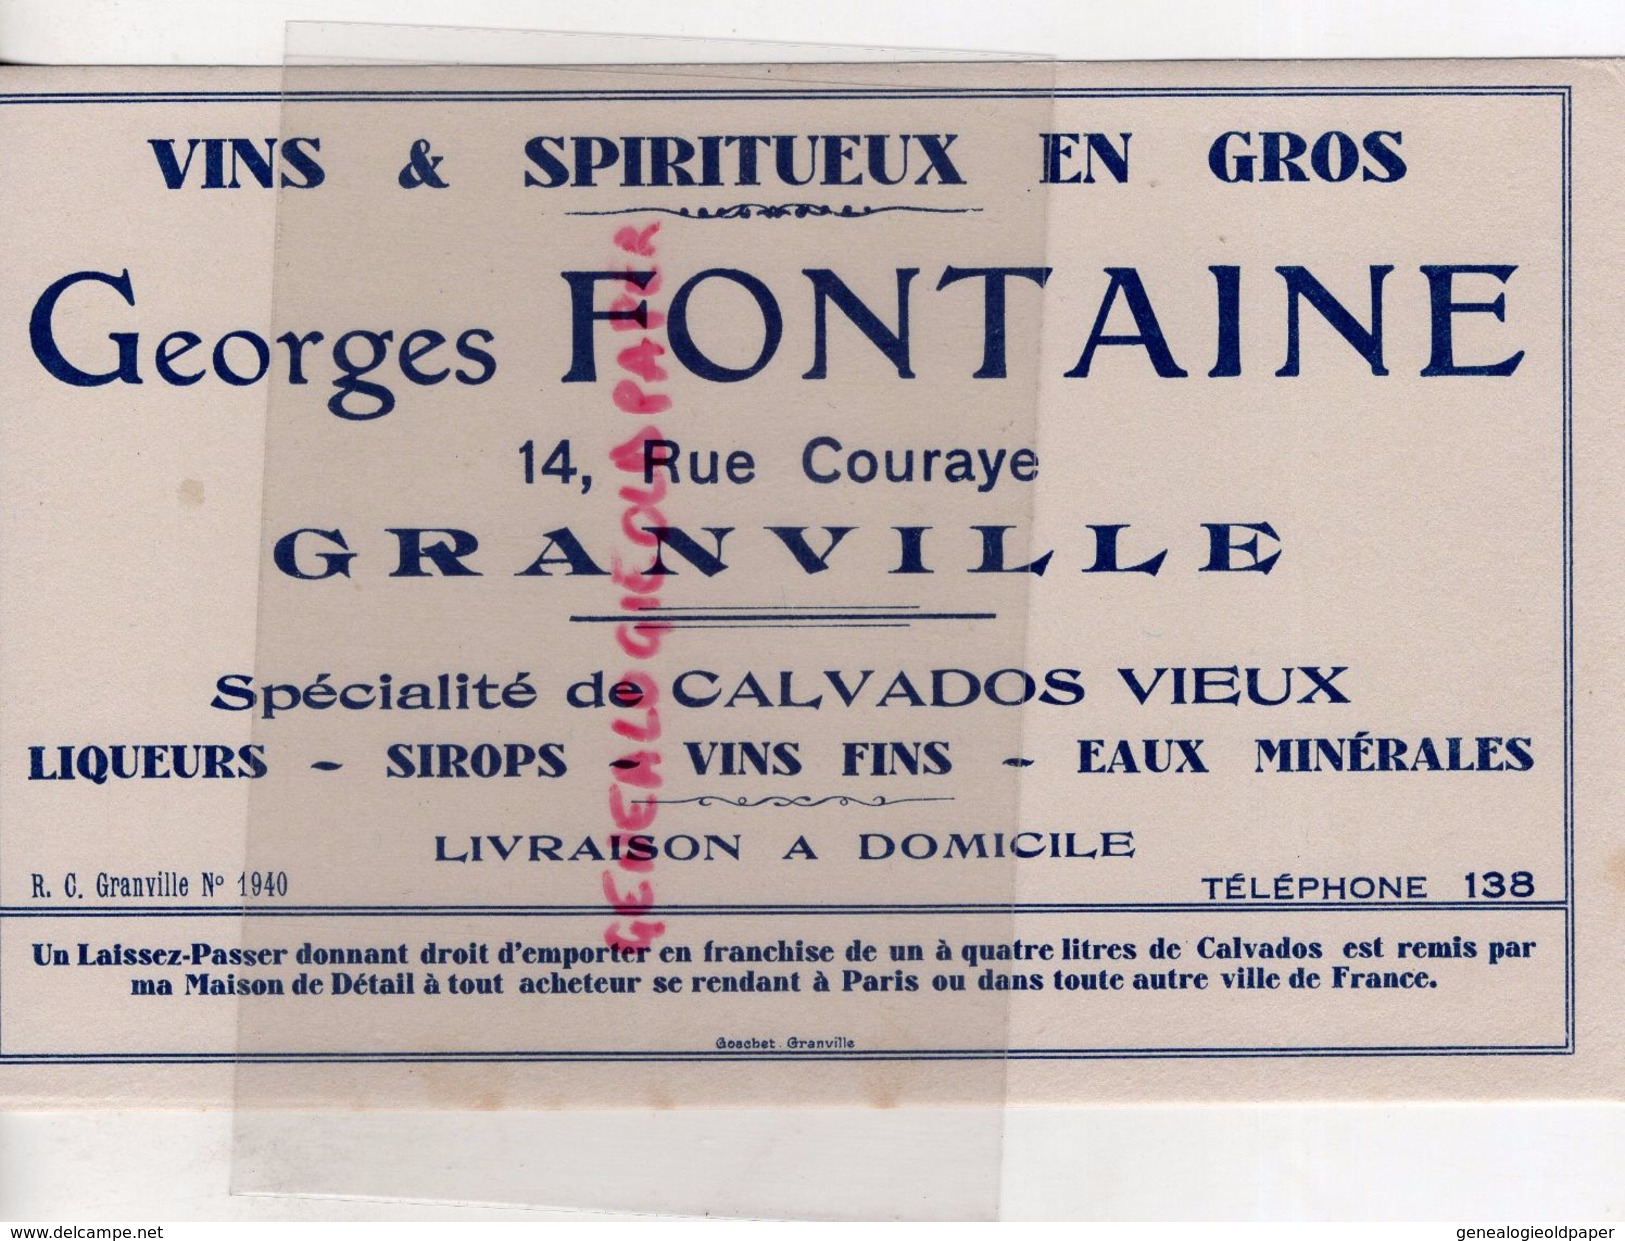 50- GRANVILLE- BUVARD GEORGES FONTAINE-VINS SPIRITUEUX-14 RUE COURAYE- CALVADOS - Alimentaire